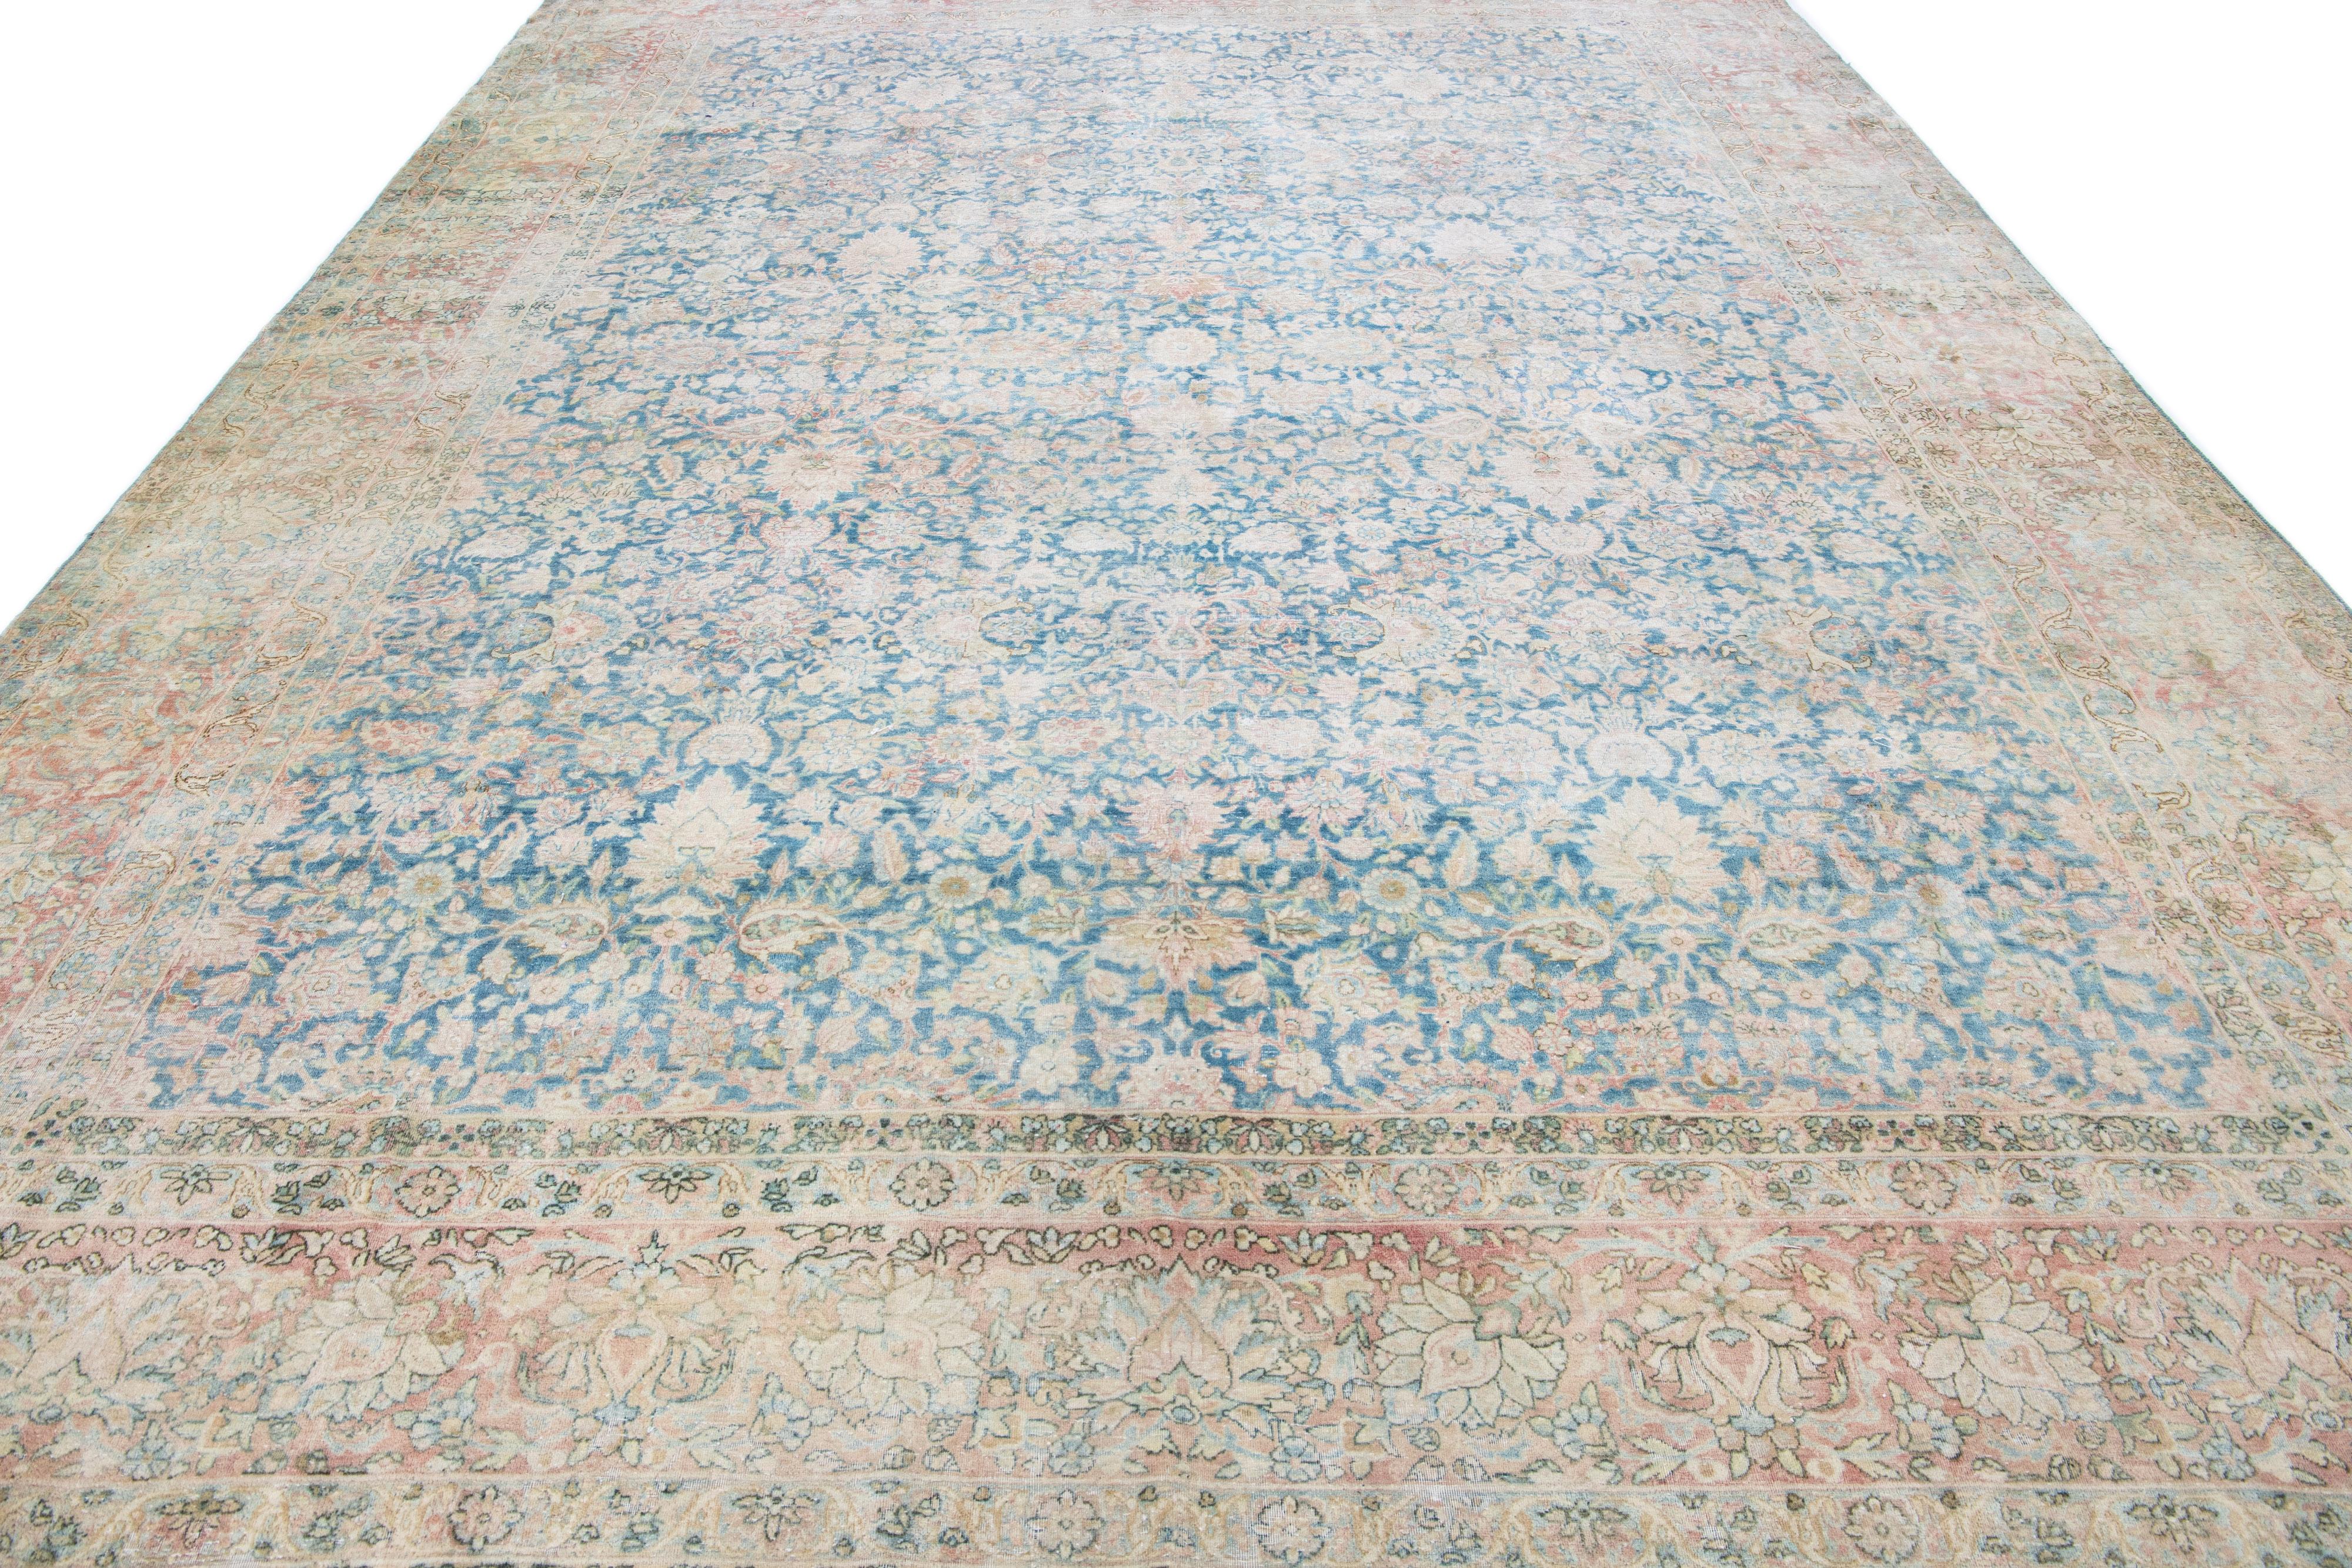 This piece is an exquisite, hand-knotted Kerman rug from vintage Persian craftsmanship. Its shabby chic woolen texture and navy blue main body give it a distinct allure. Embellished with a red-pink border, the rug sports a brown and blue that